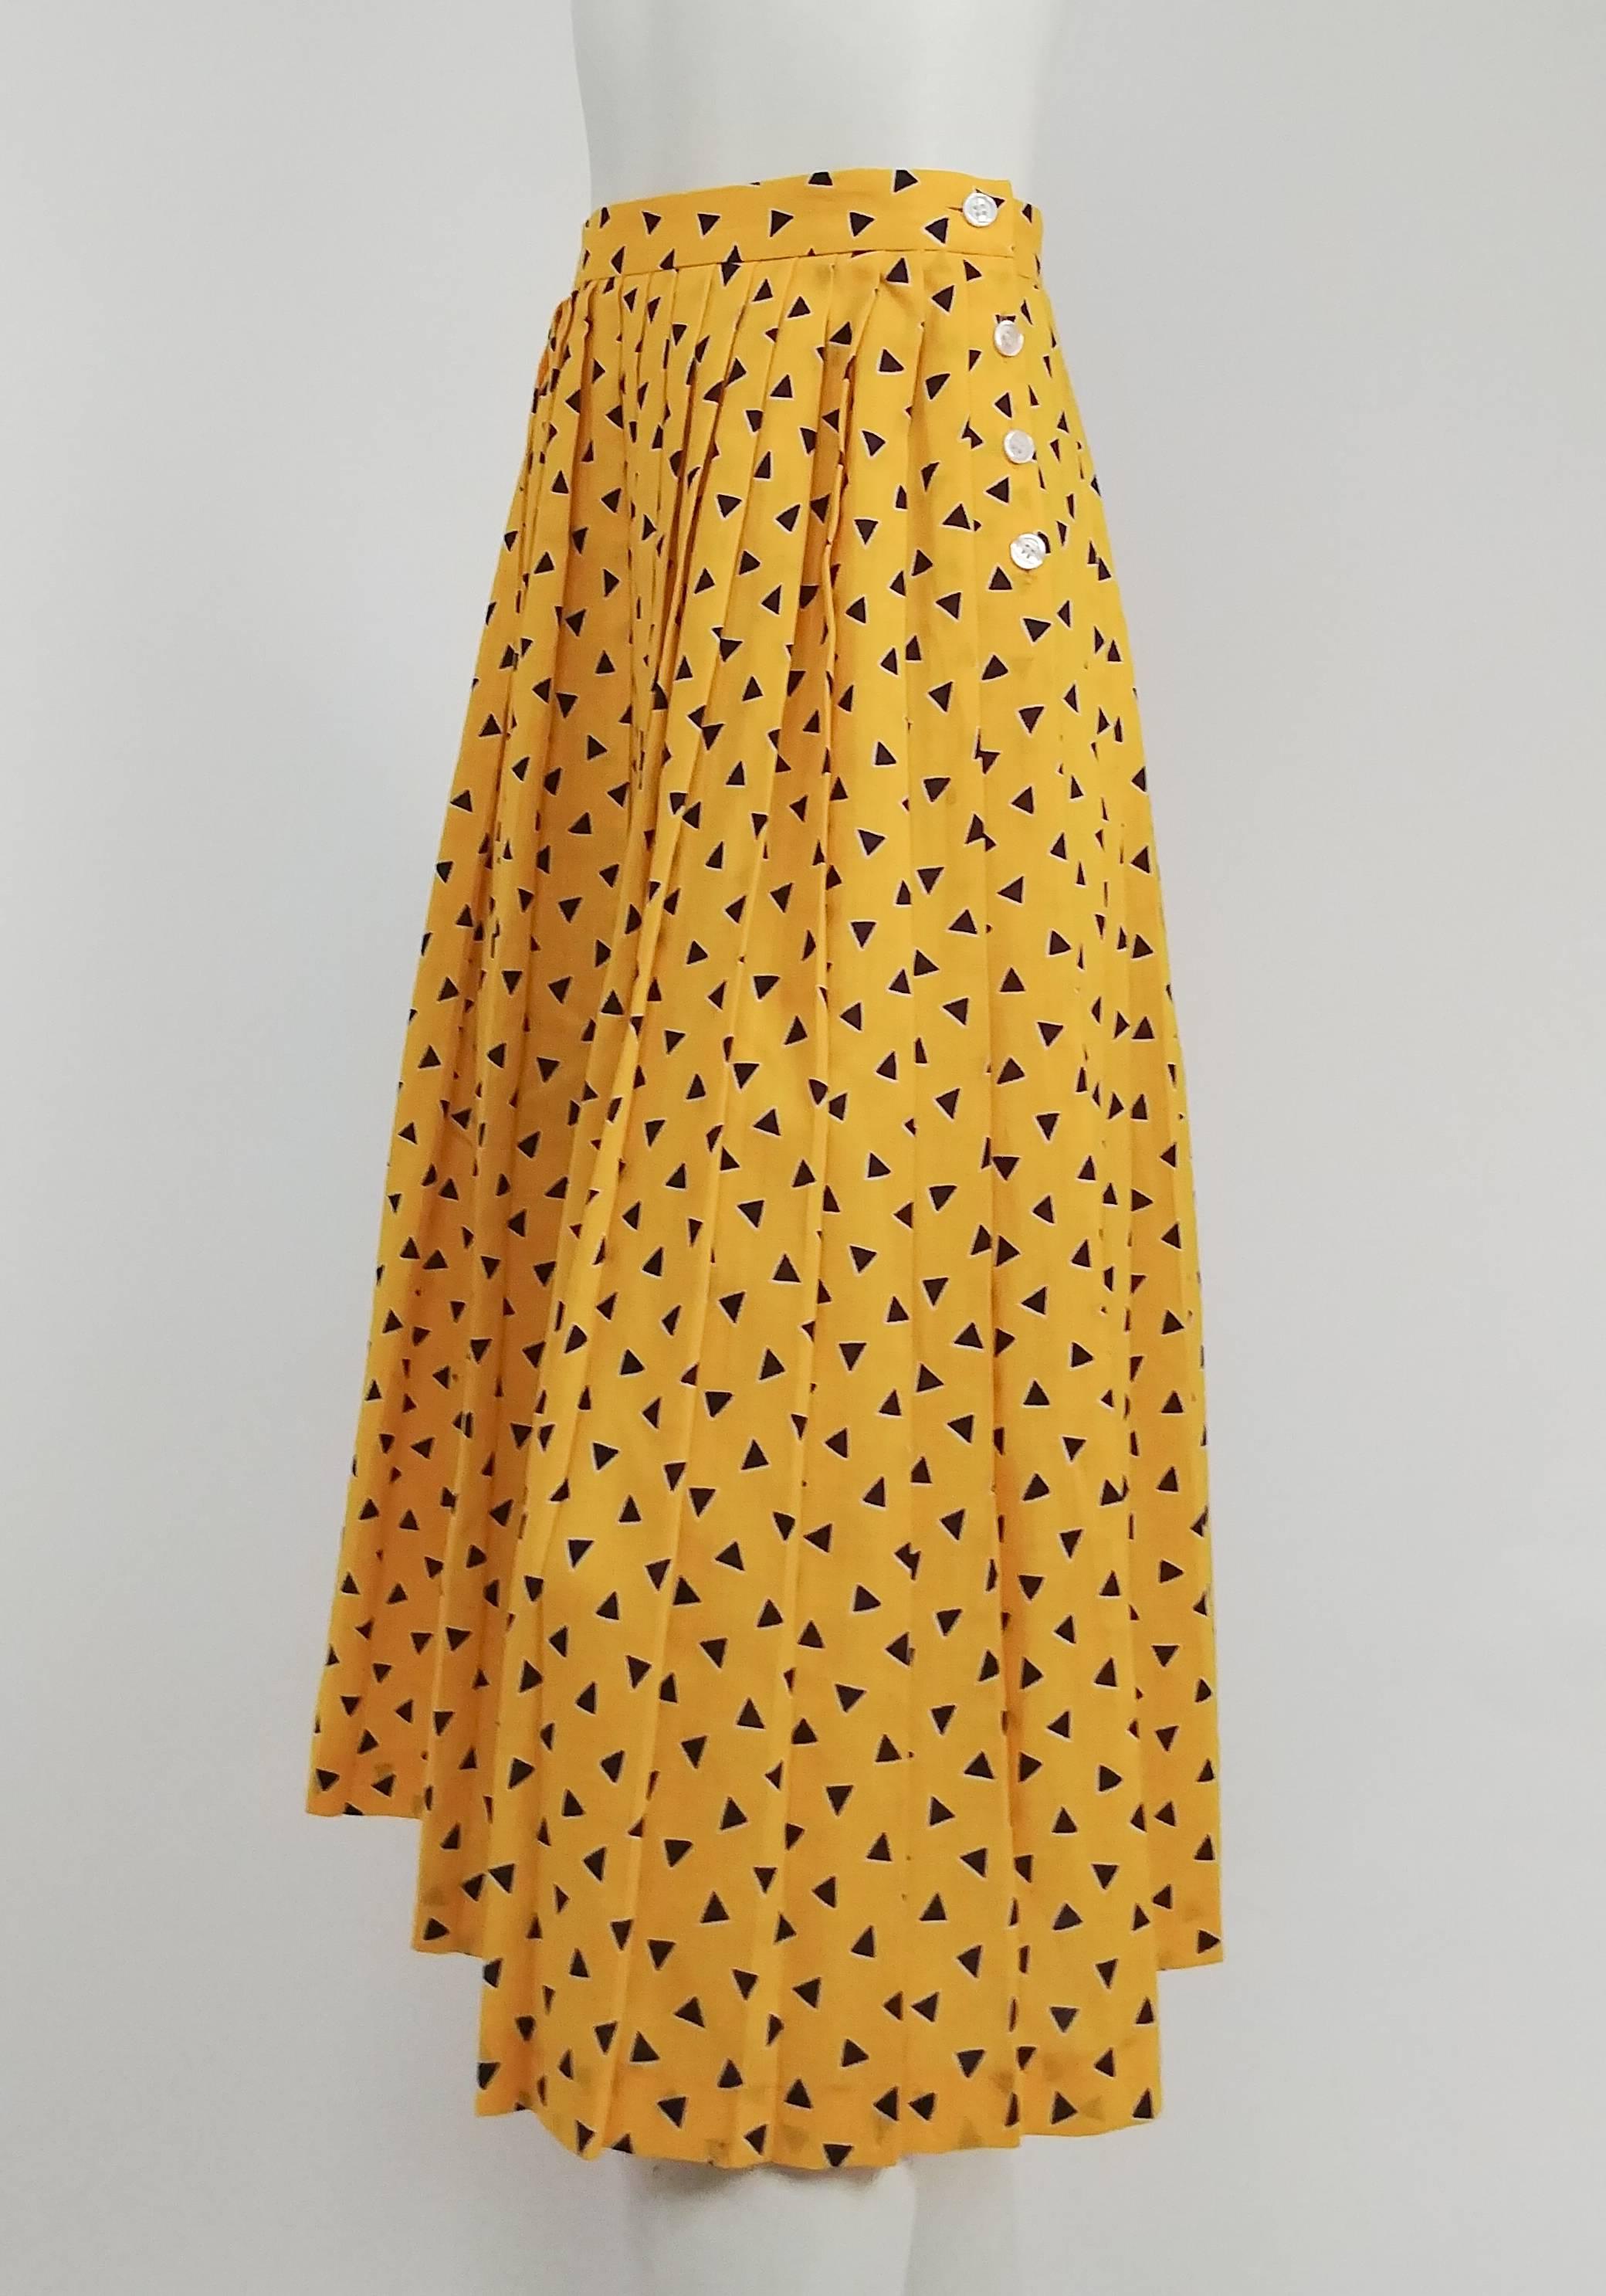 1980s Yellow Geometric Triangle Pleated Skirt. Buttons up side. 100% wool. 